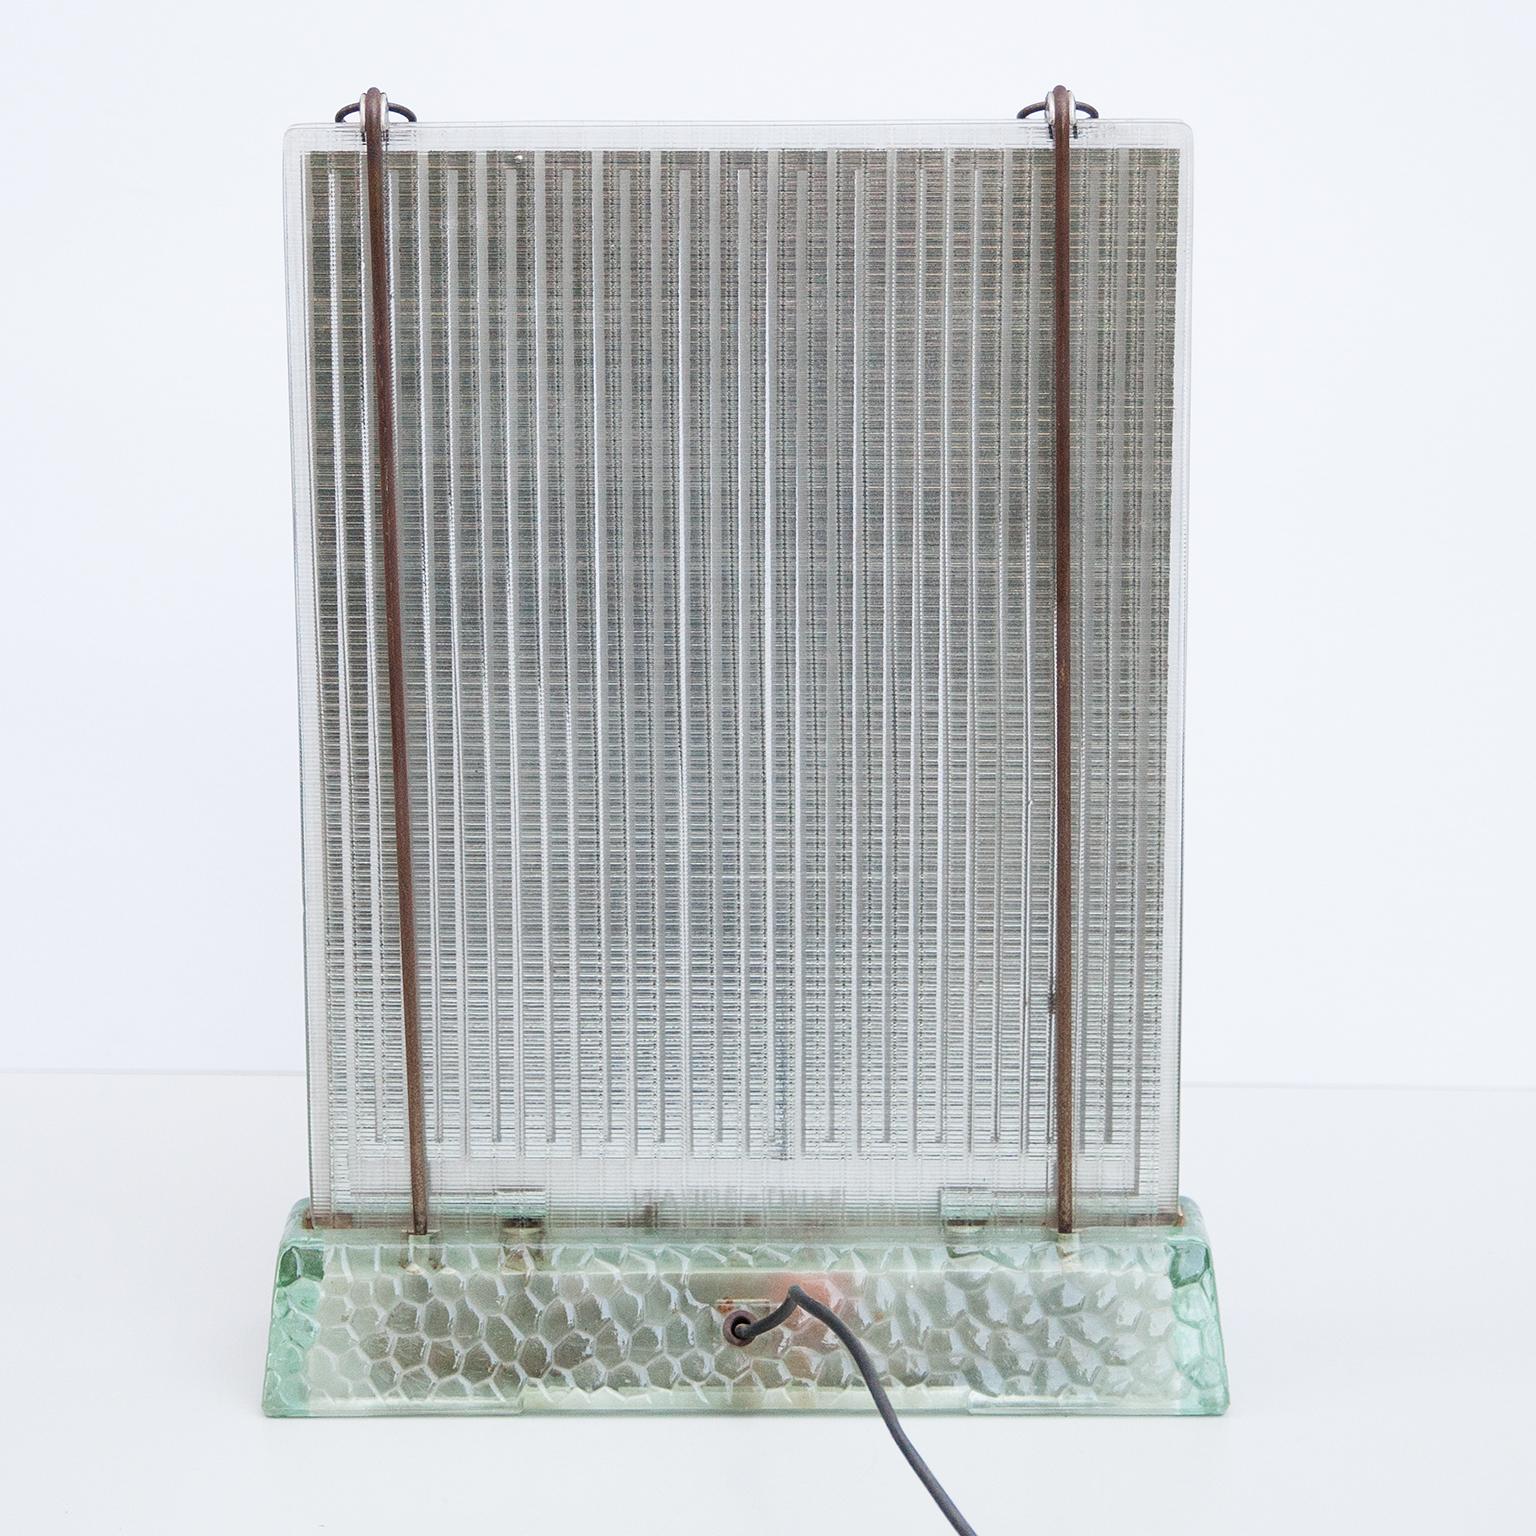 Glass Radiator by Rene-Andre Coulon for Saint-Goban, France, 1937 For Sale 1